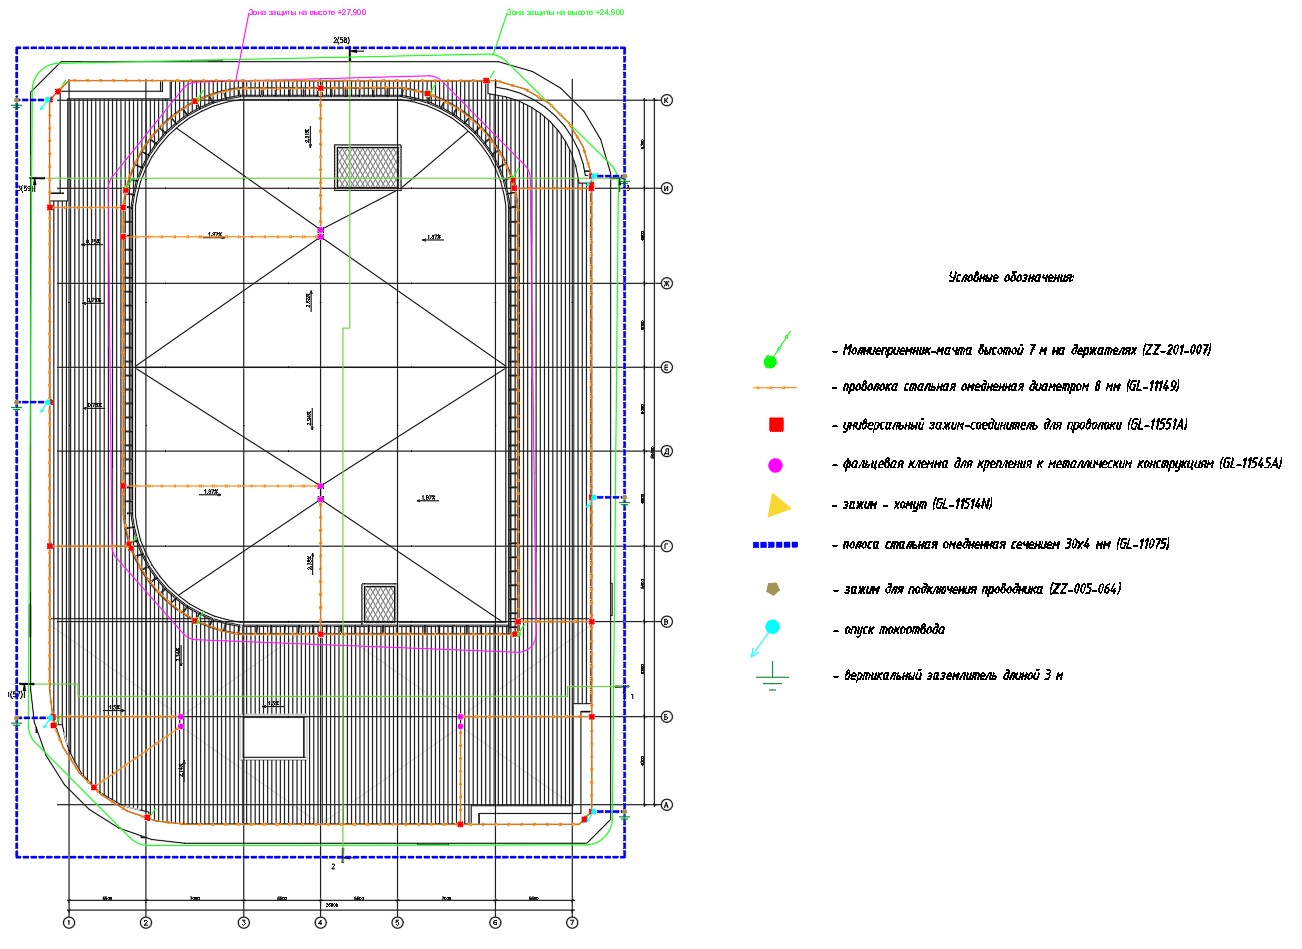 Figure 2. Layout of equipment to provide lightning protection for parking space with offices in the Krasnodar Kray